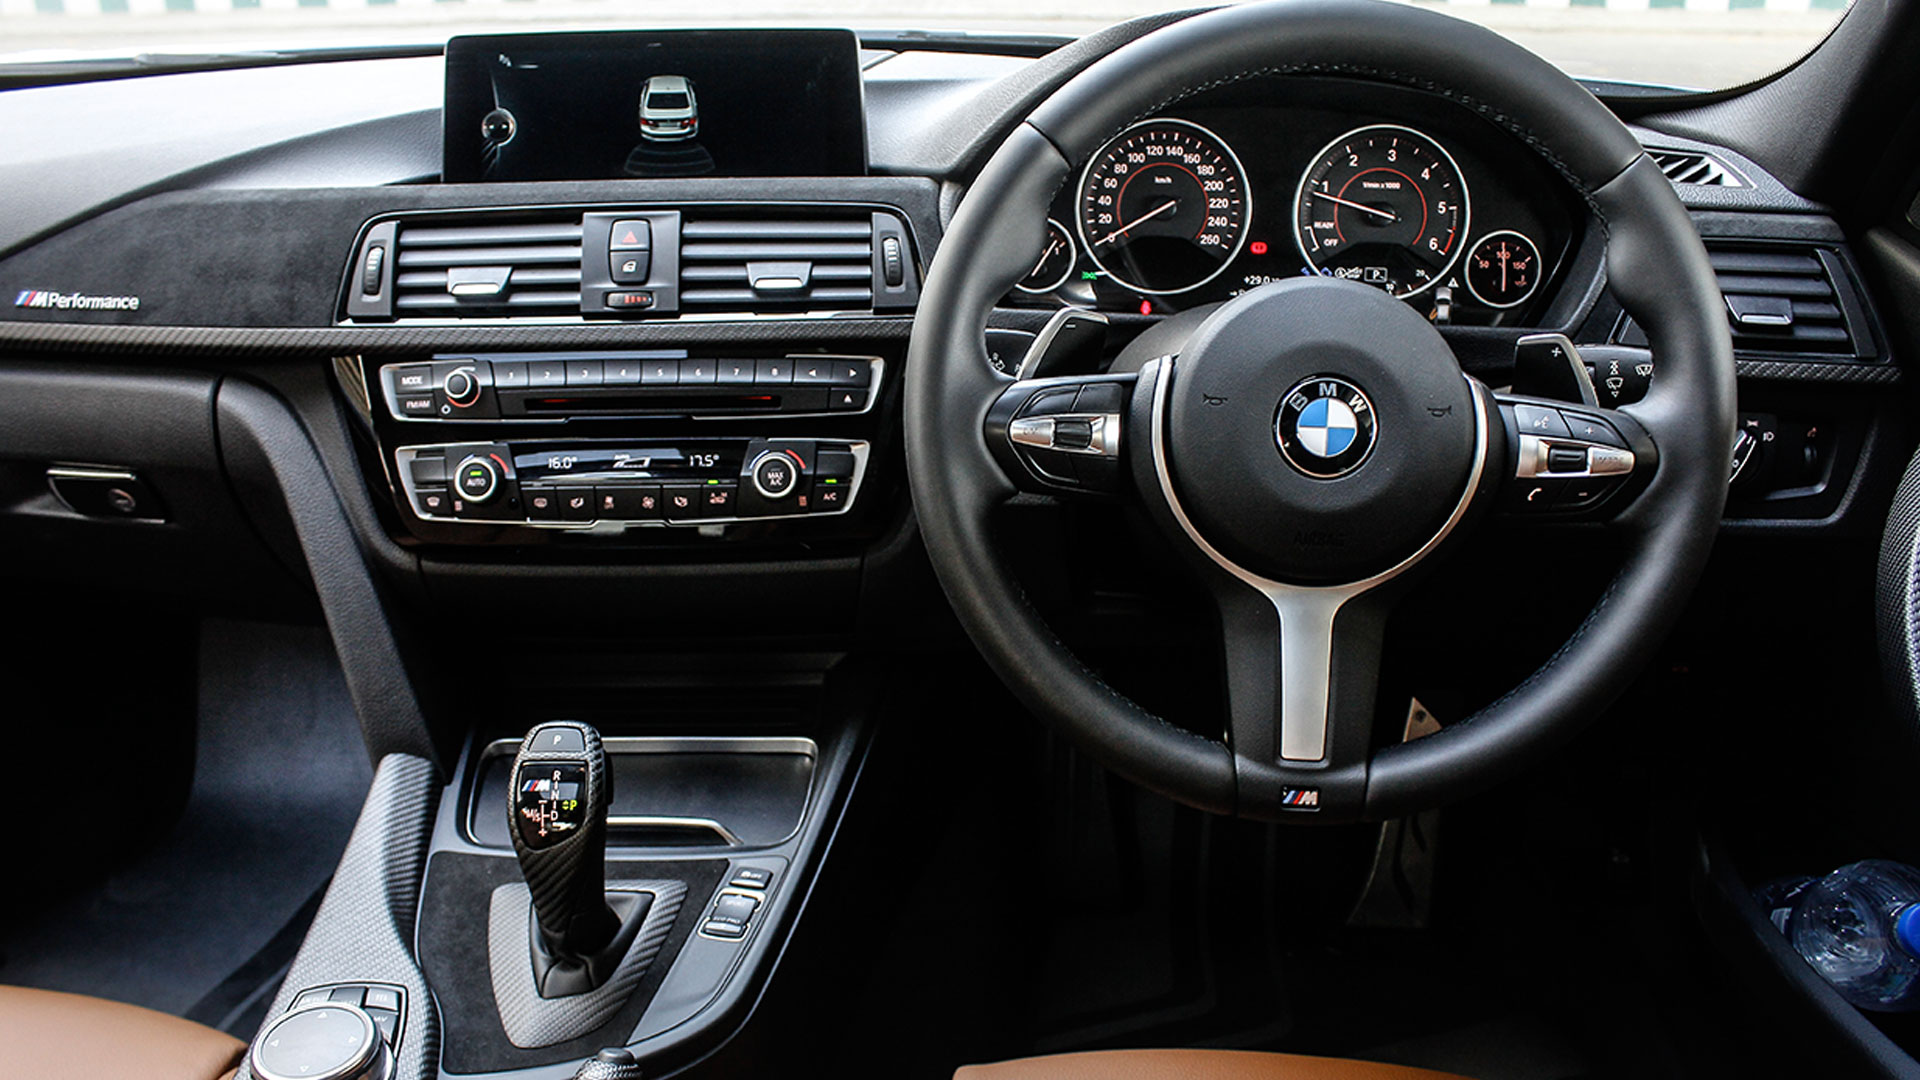 lever educate Baron BMW 3 series 2015 320d Luxury Line Interior Car Photos - Overdrive